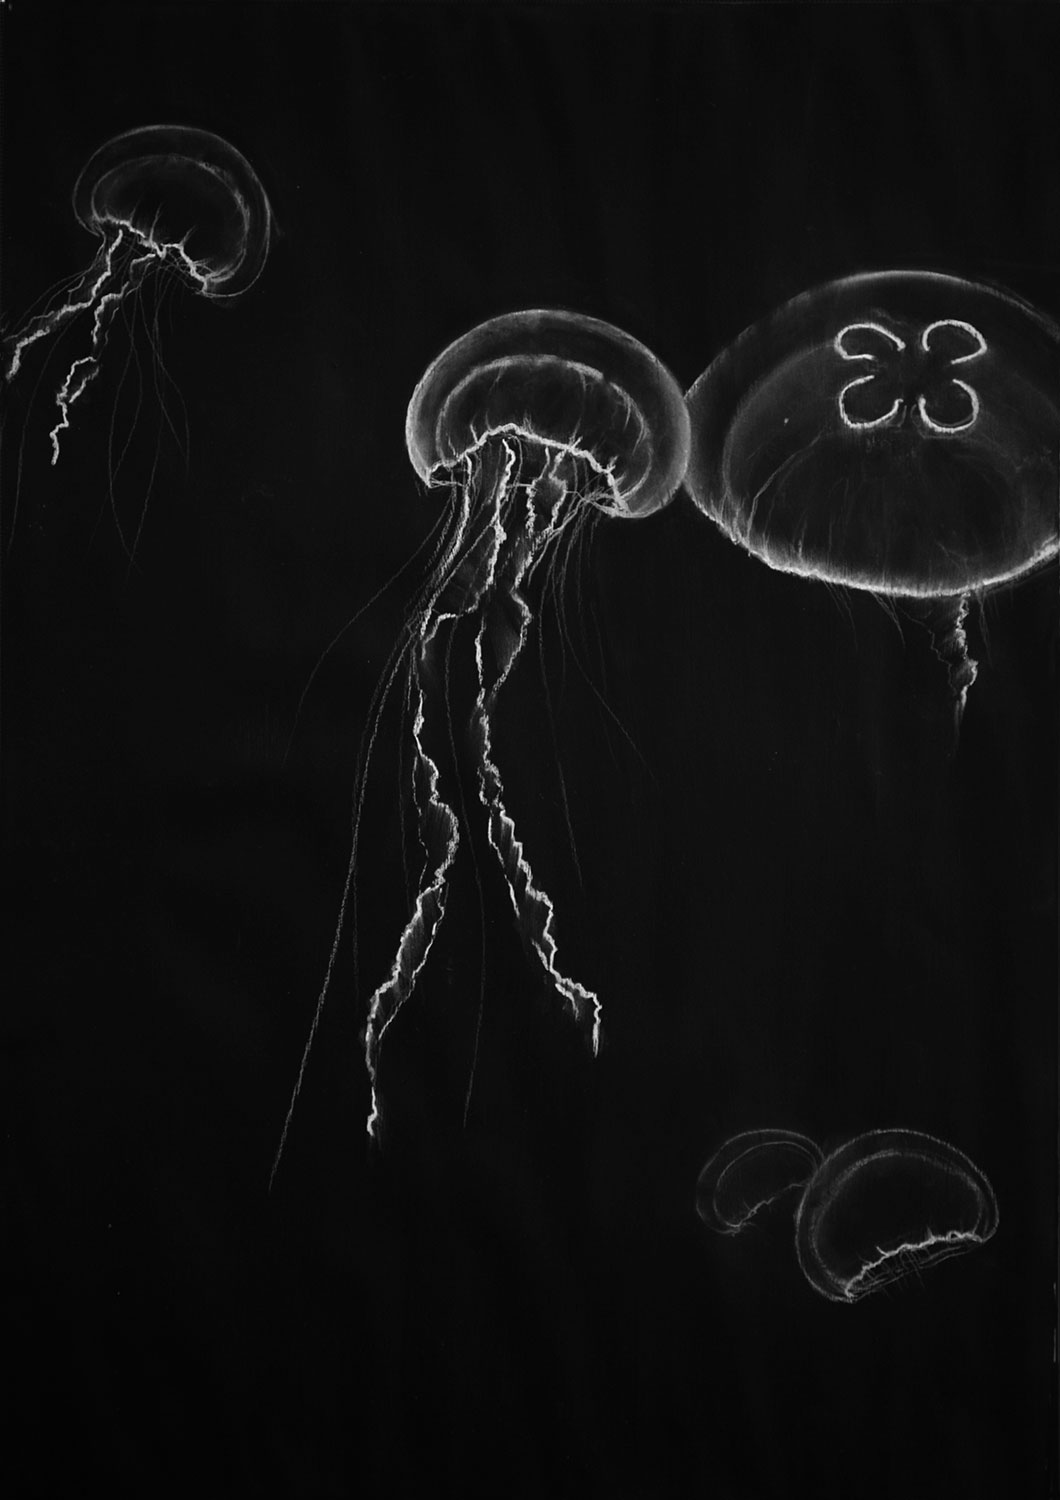 jelly fishes - Wolfgang Stiller